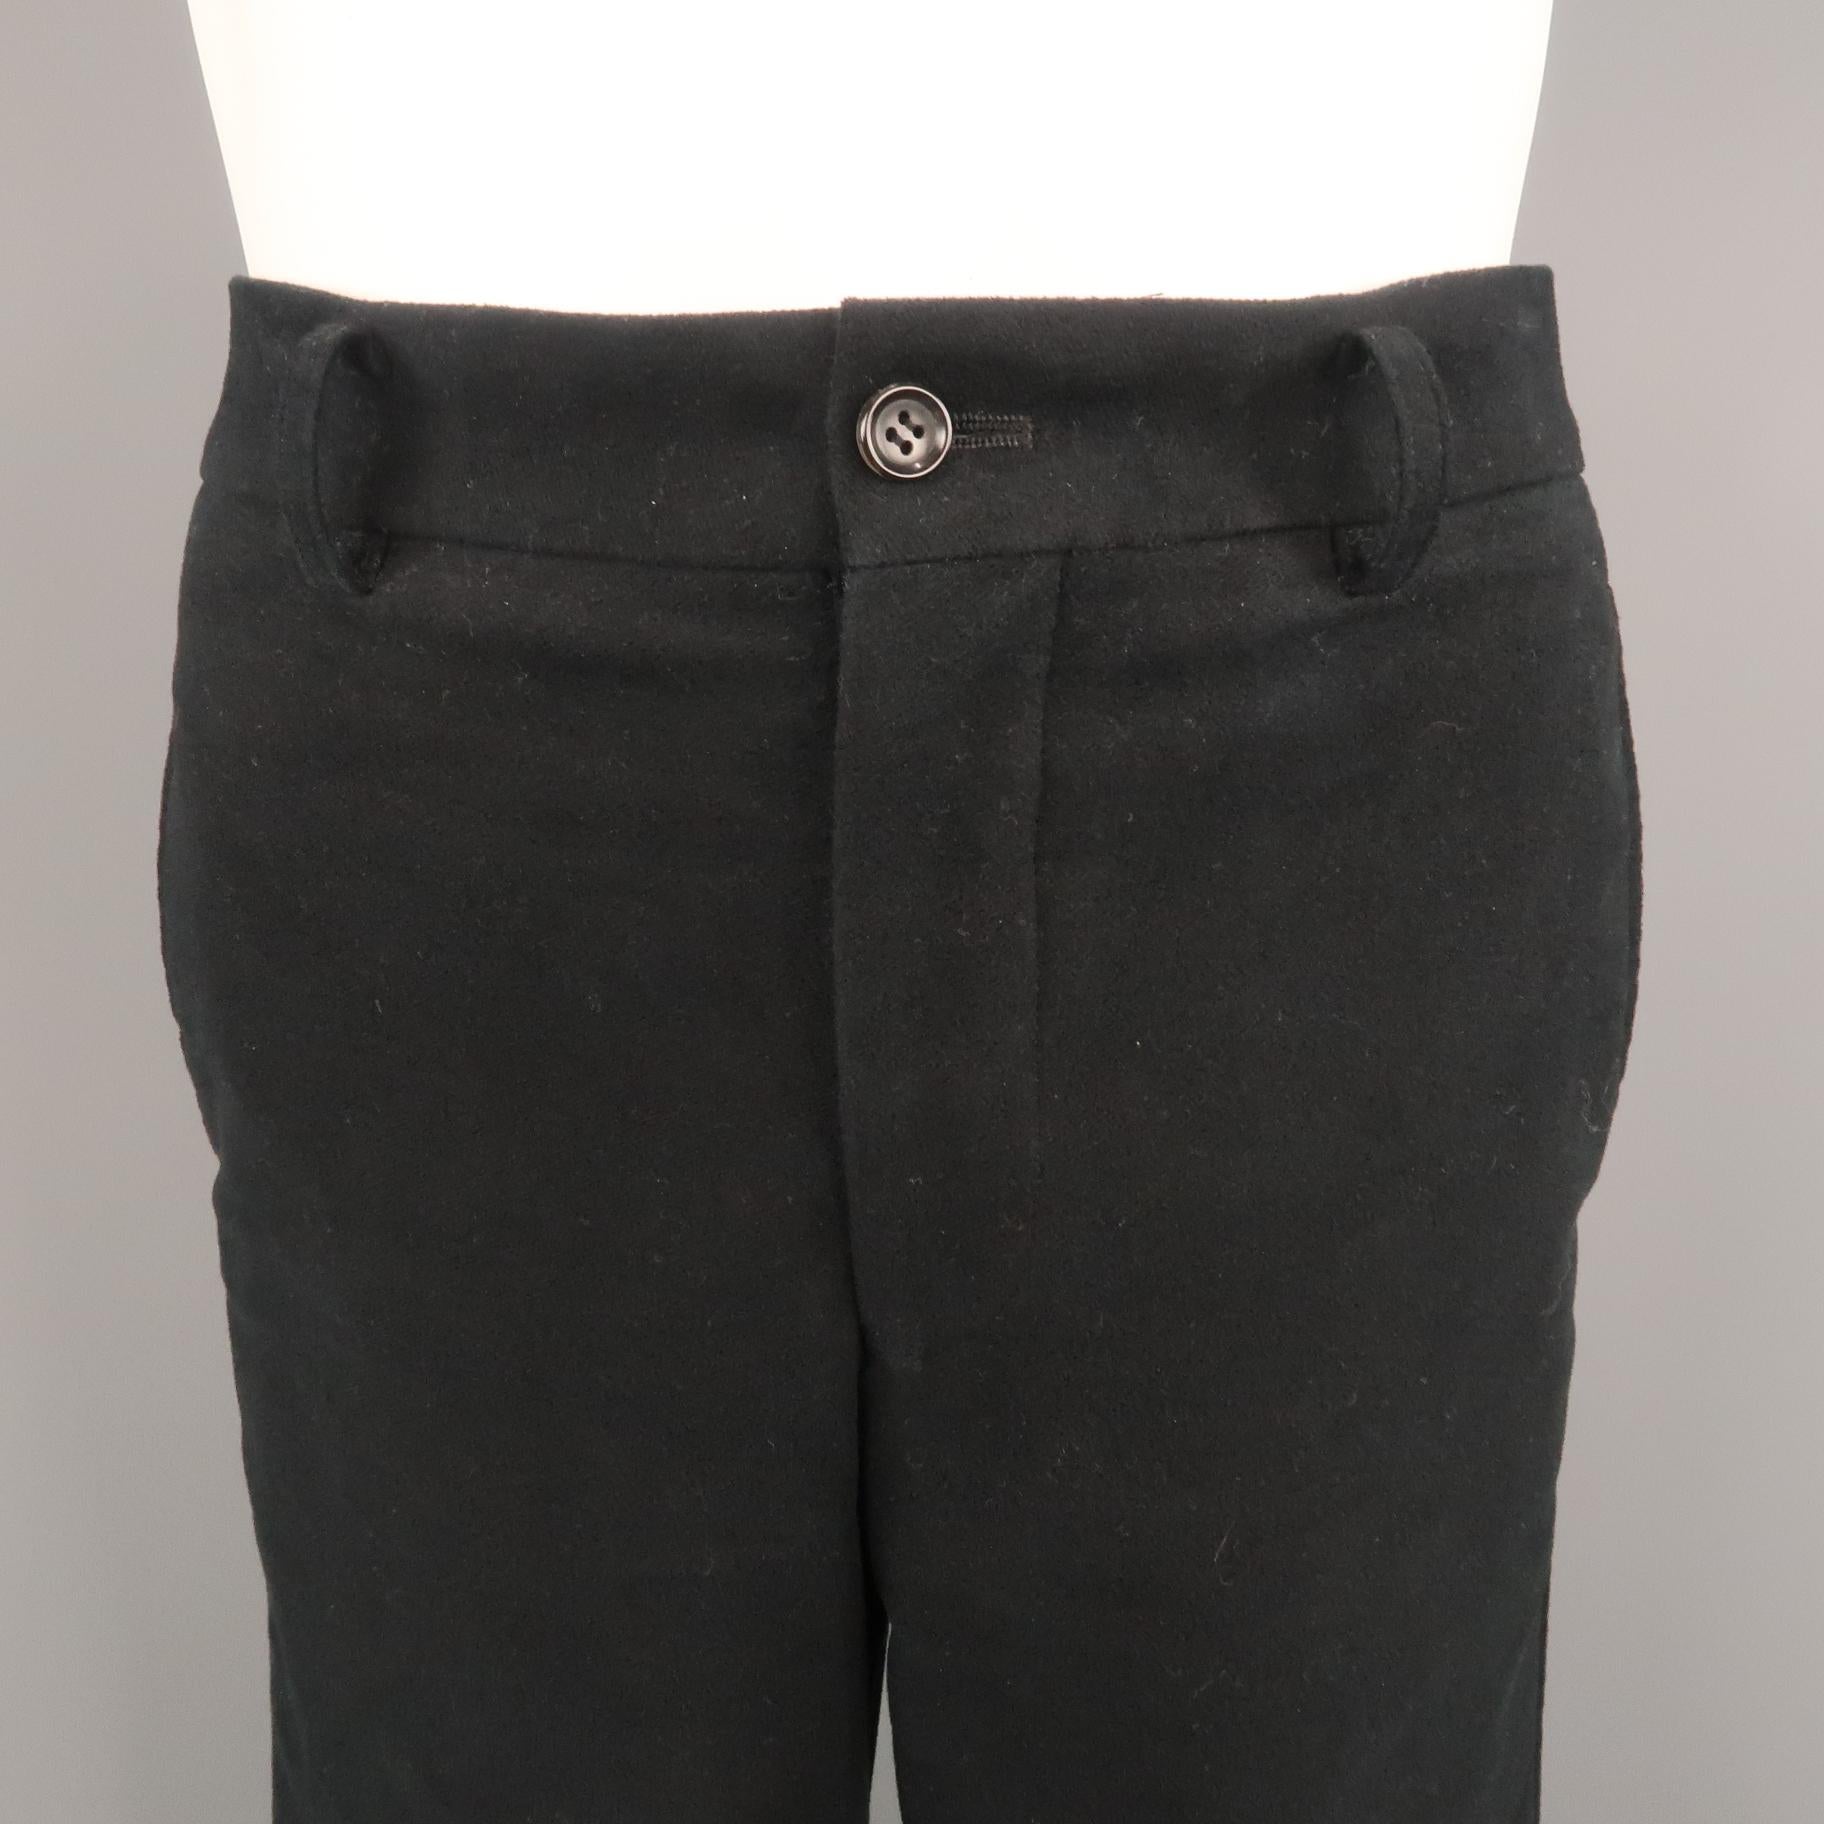 COMME des GARCONS HOMME PLUS casual pant comes in a black moleskin featuring knee stitch details. AD2017. Made in Japan.
 
Excellent Pre-Owned Condition.
Marked: L
 
Measurements:
 
Waist: 32 in.
Rise: 8.5 in.
Inseam: 34 in.
